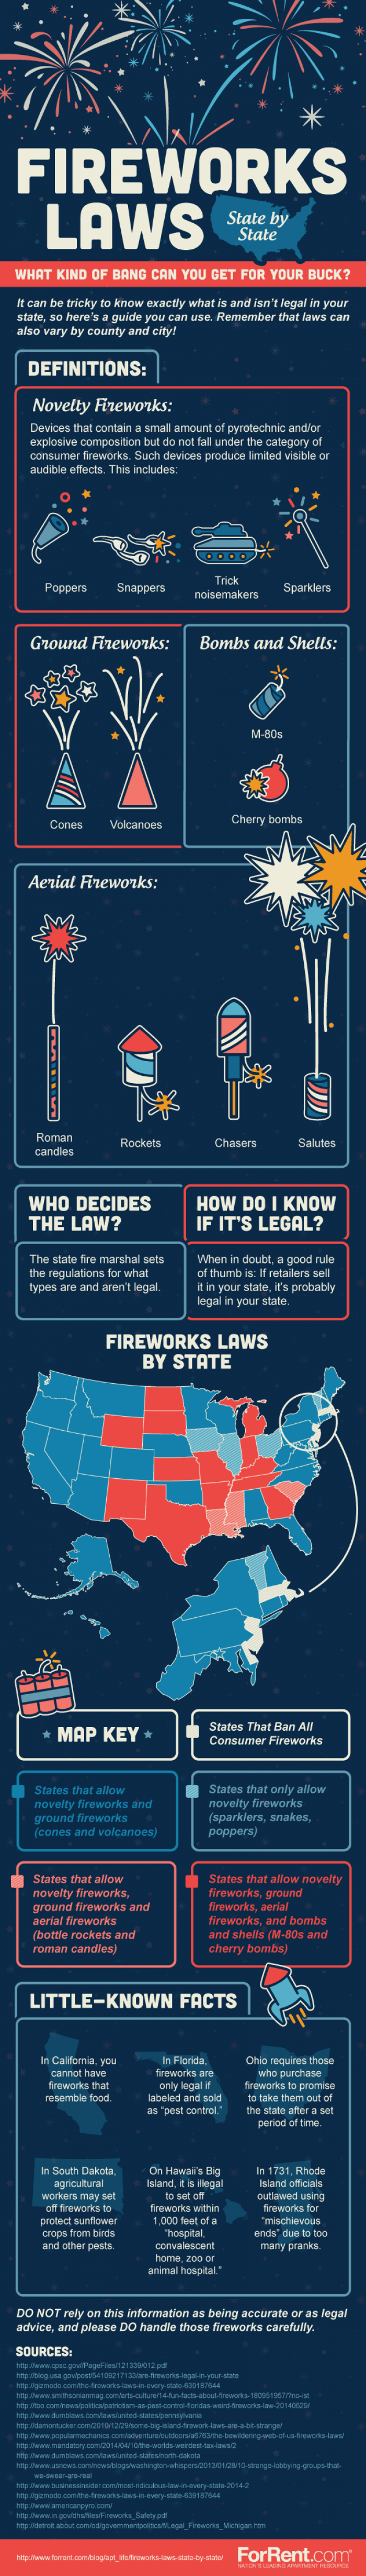 Complete guide to fireworks laws by state